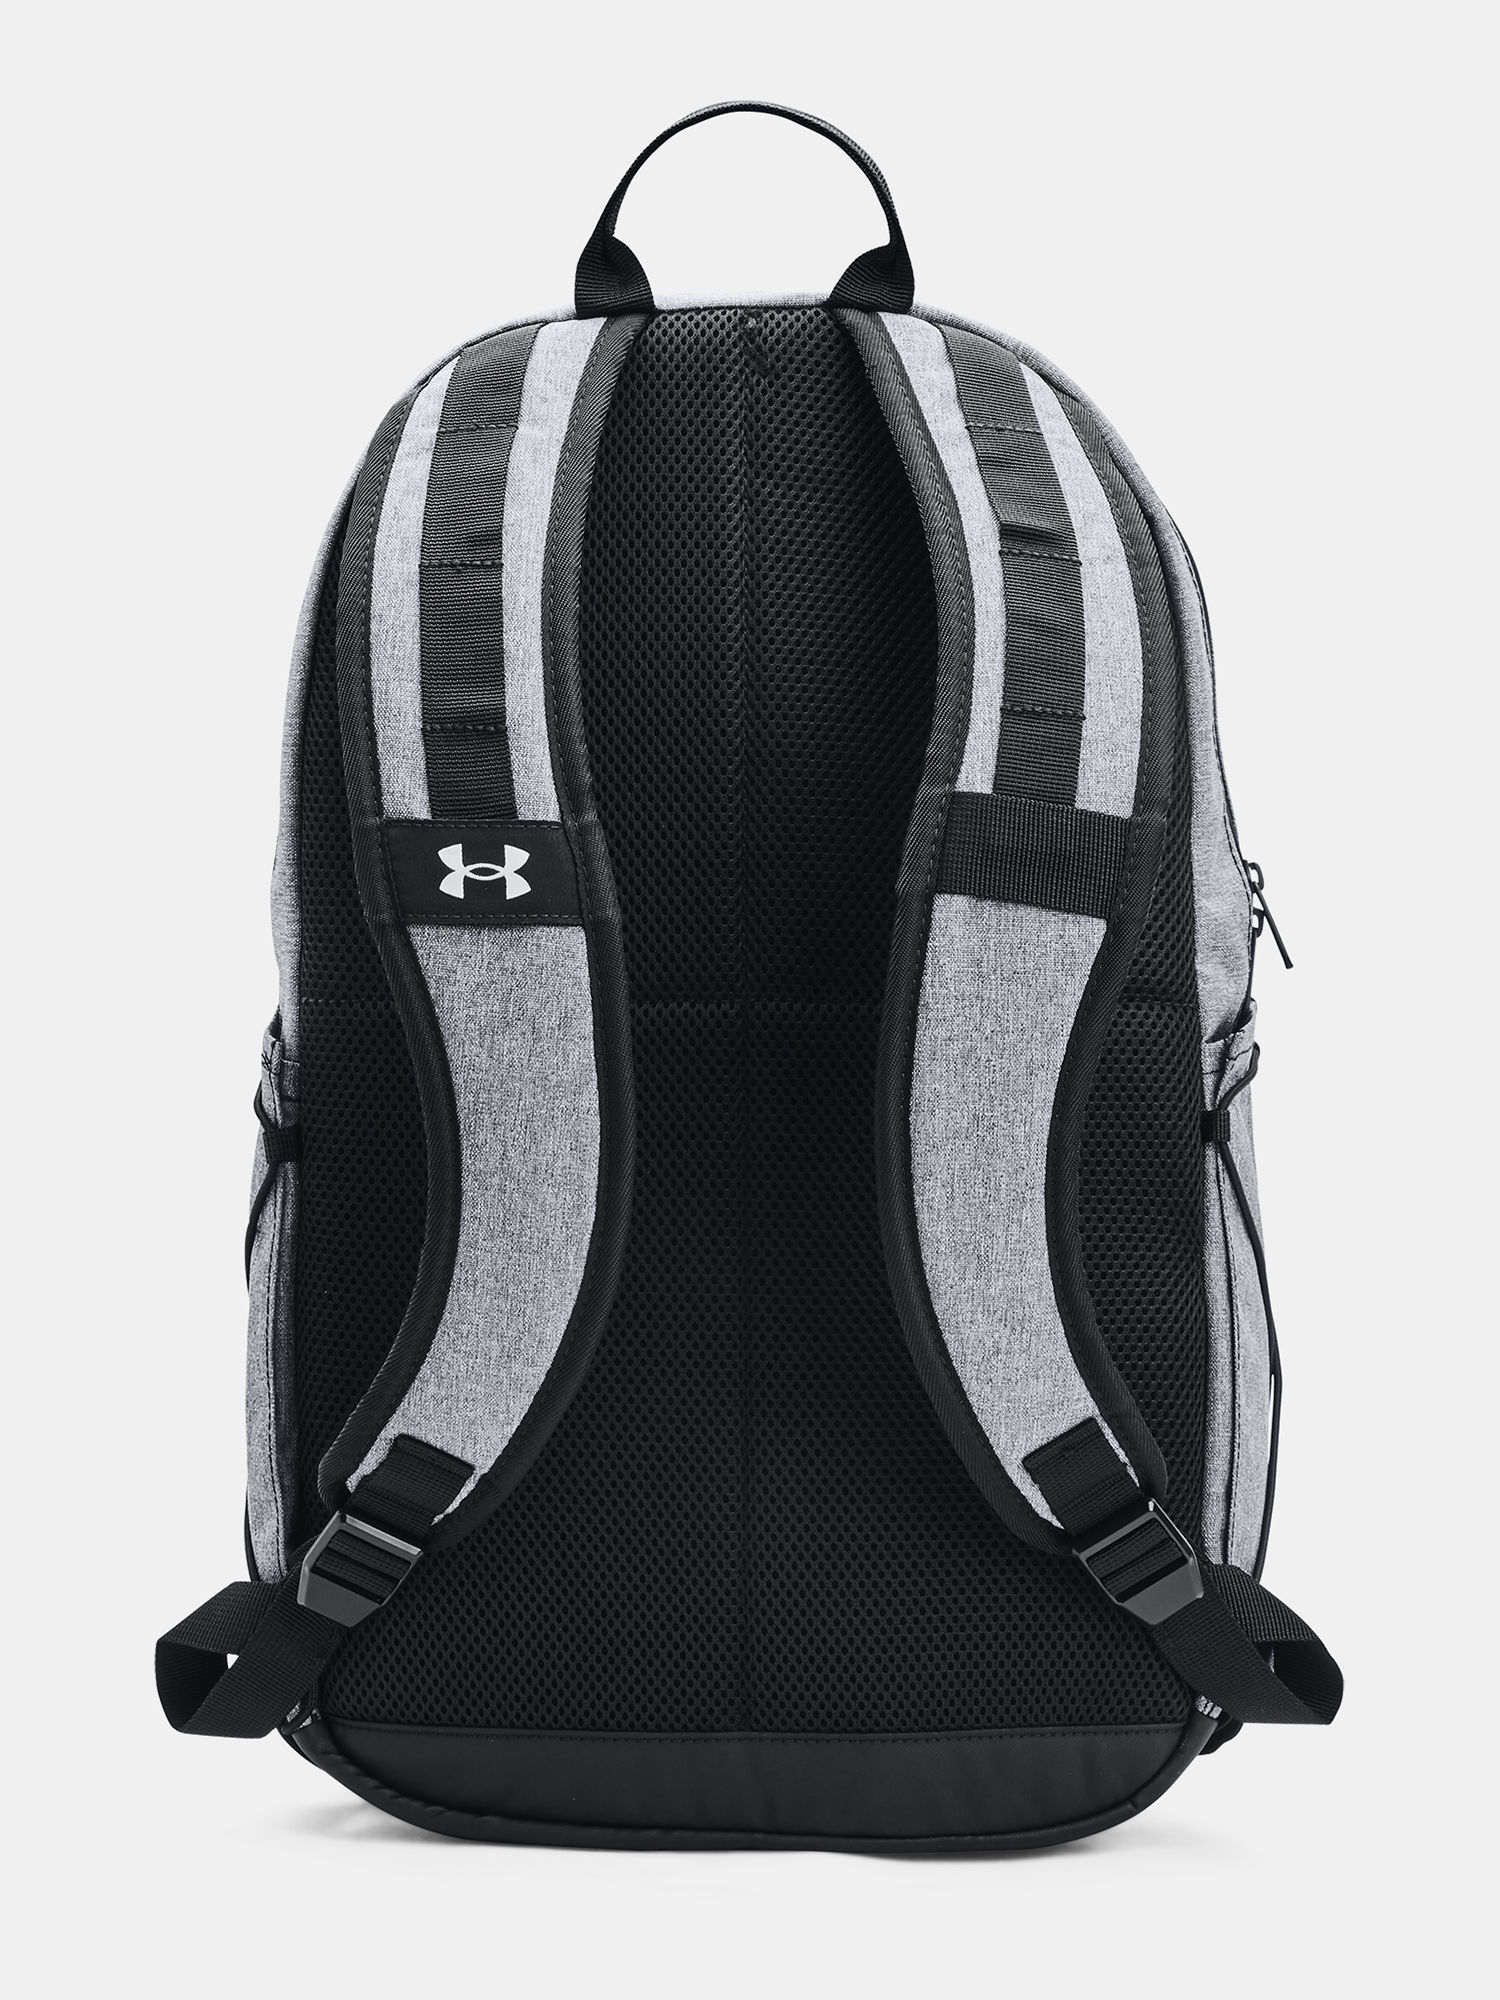 Batoh Under Armour Gametime Backpack-GRY (2)